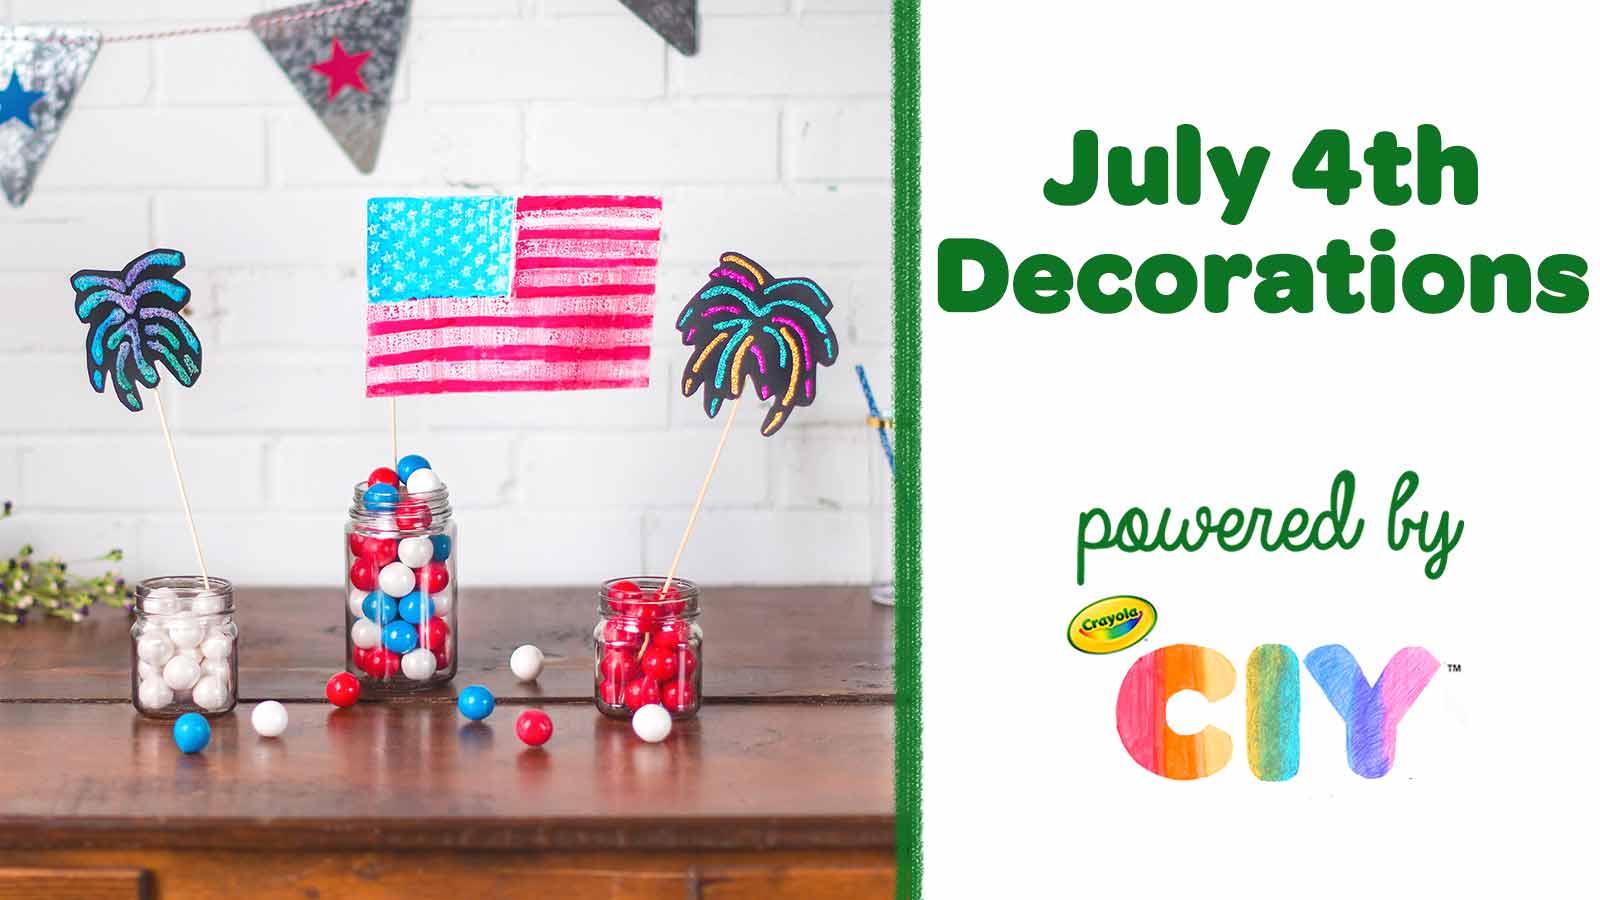 July 4th Decorations CIY Video Poster Frame